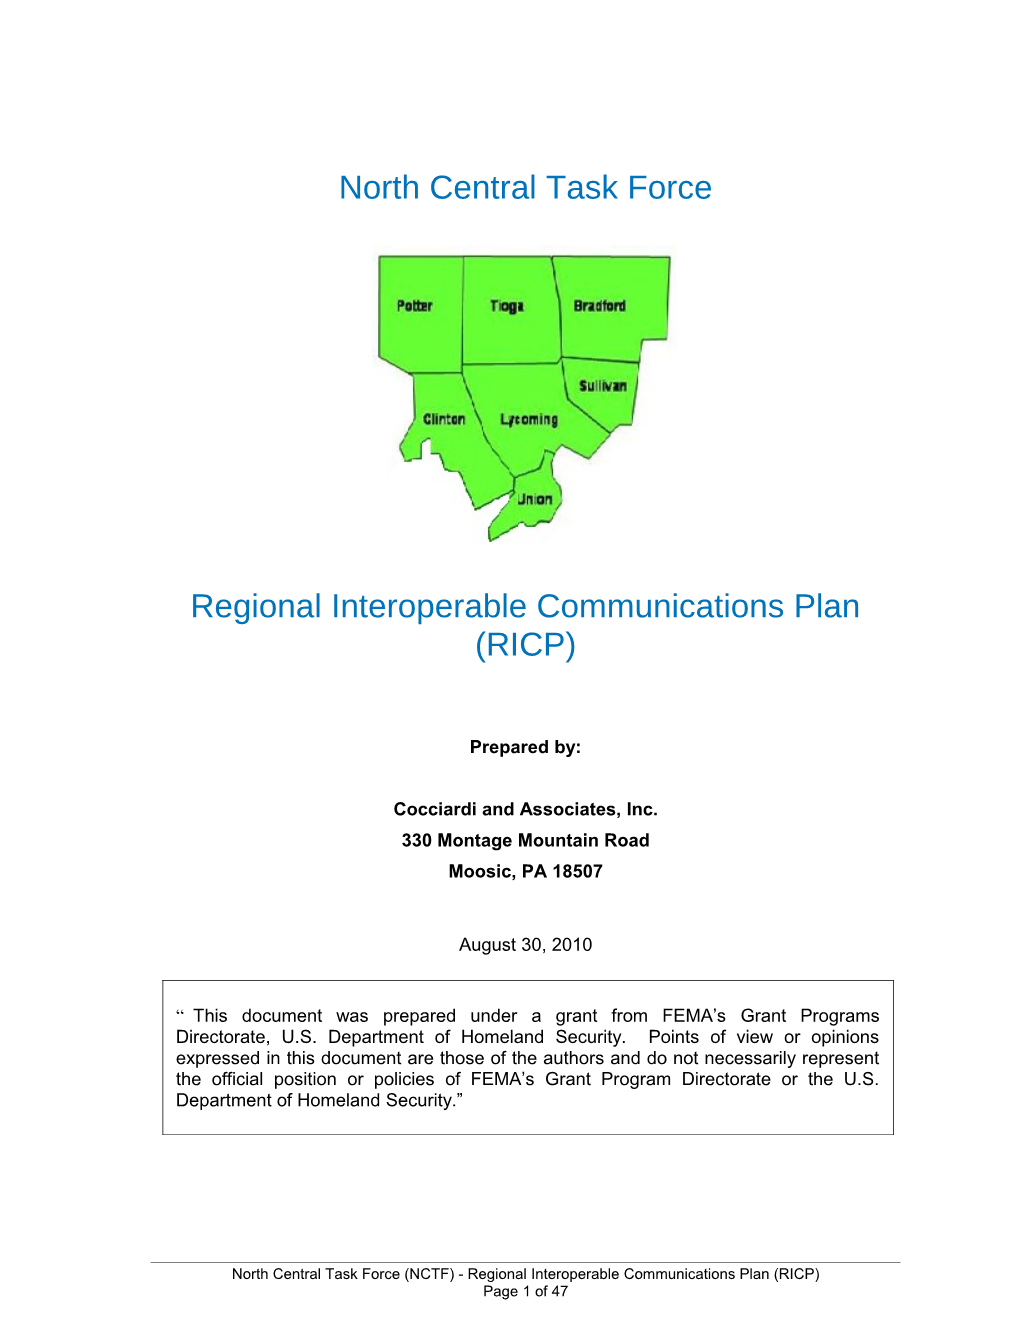 Template for Regional Interoperable Communications Plan (RICP) a System of Systems